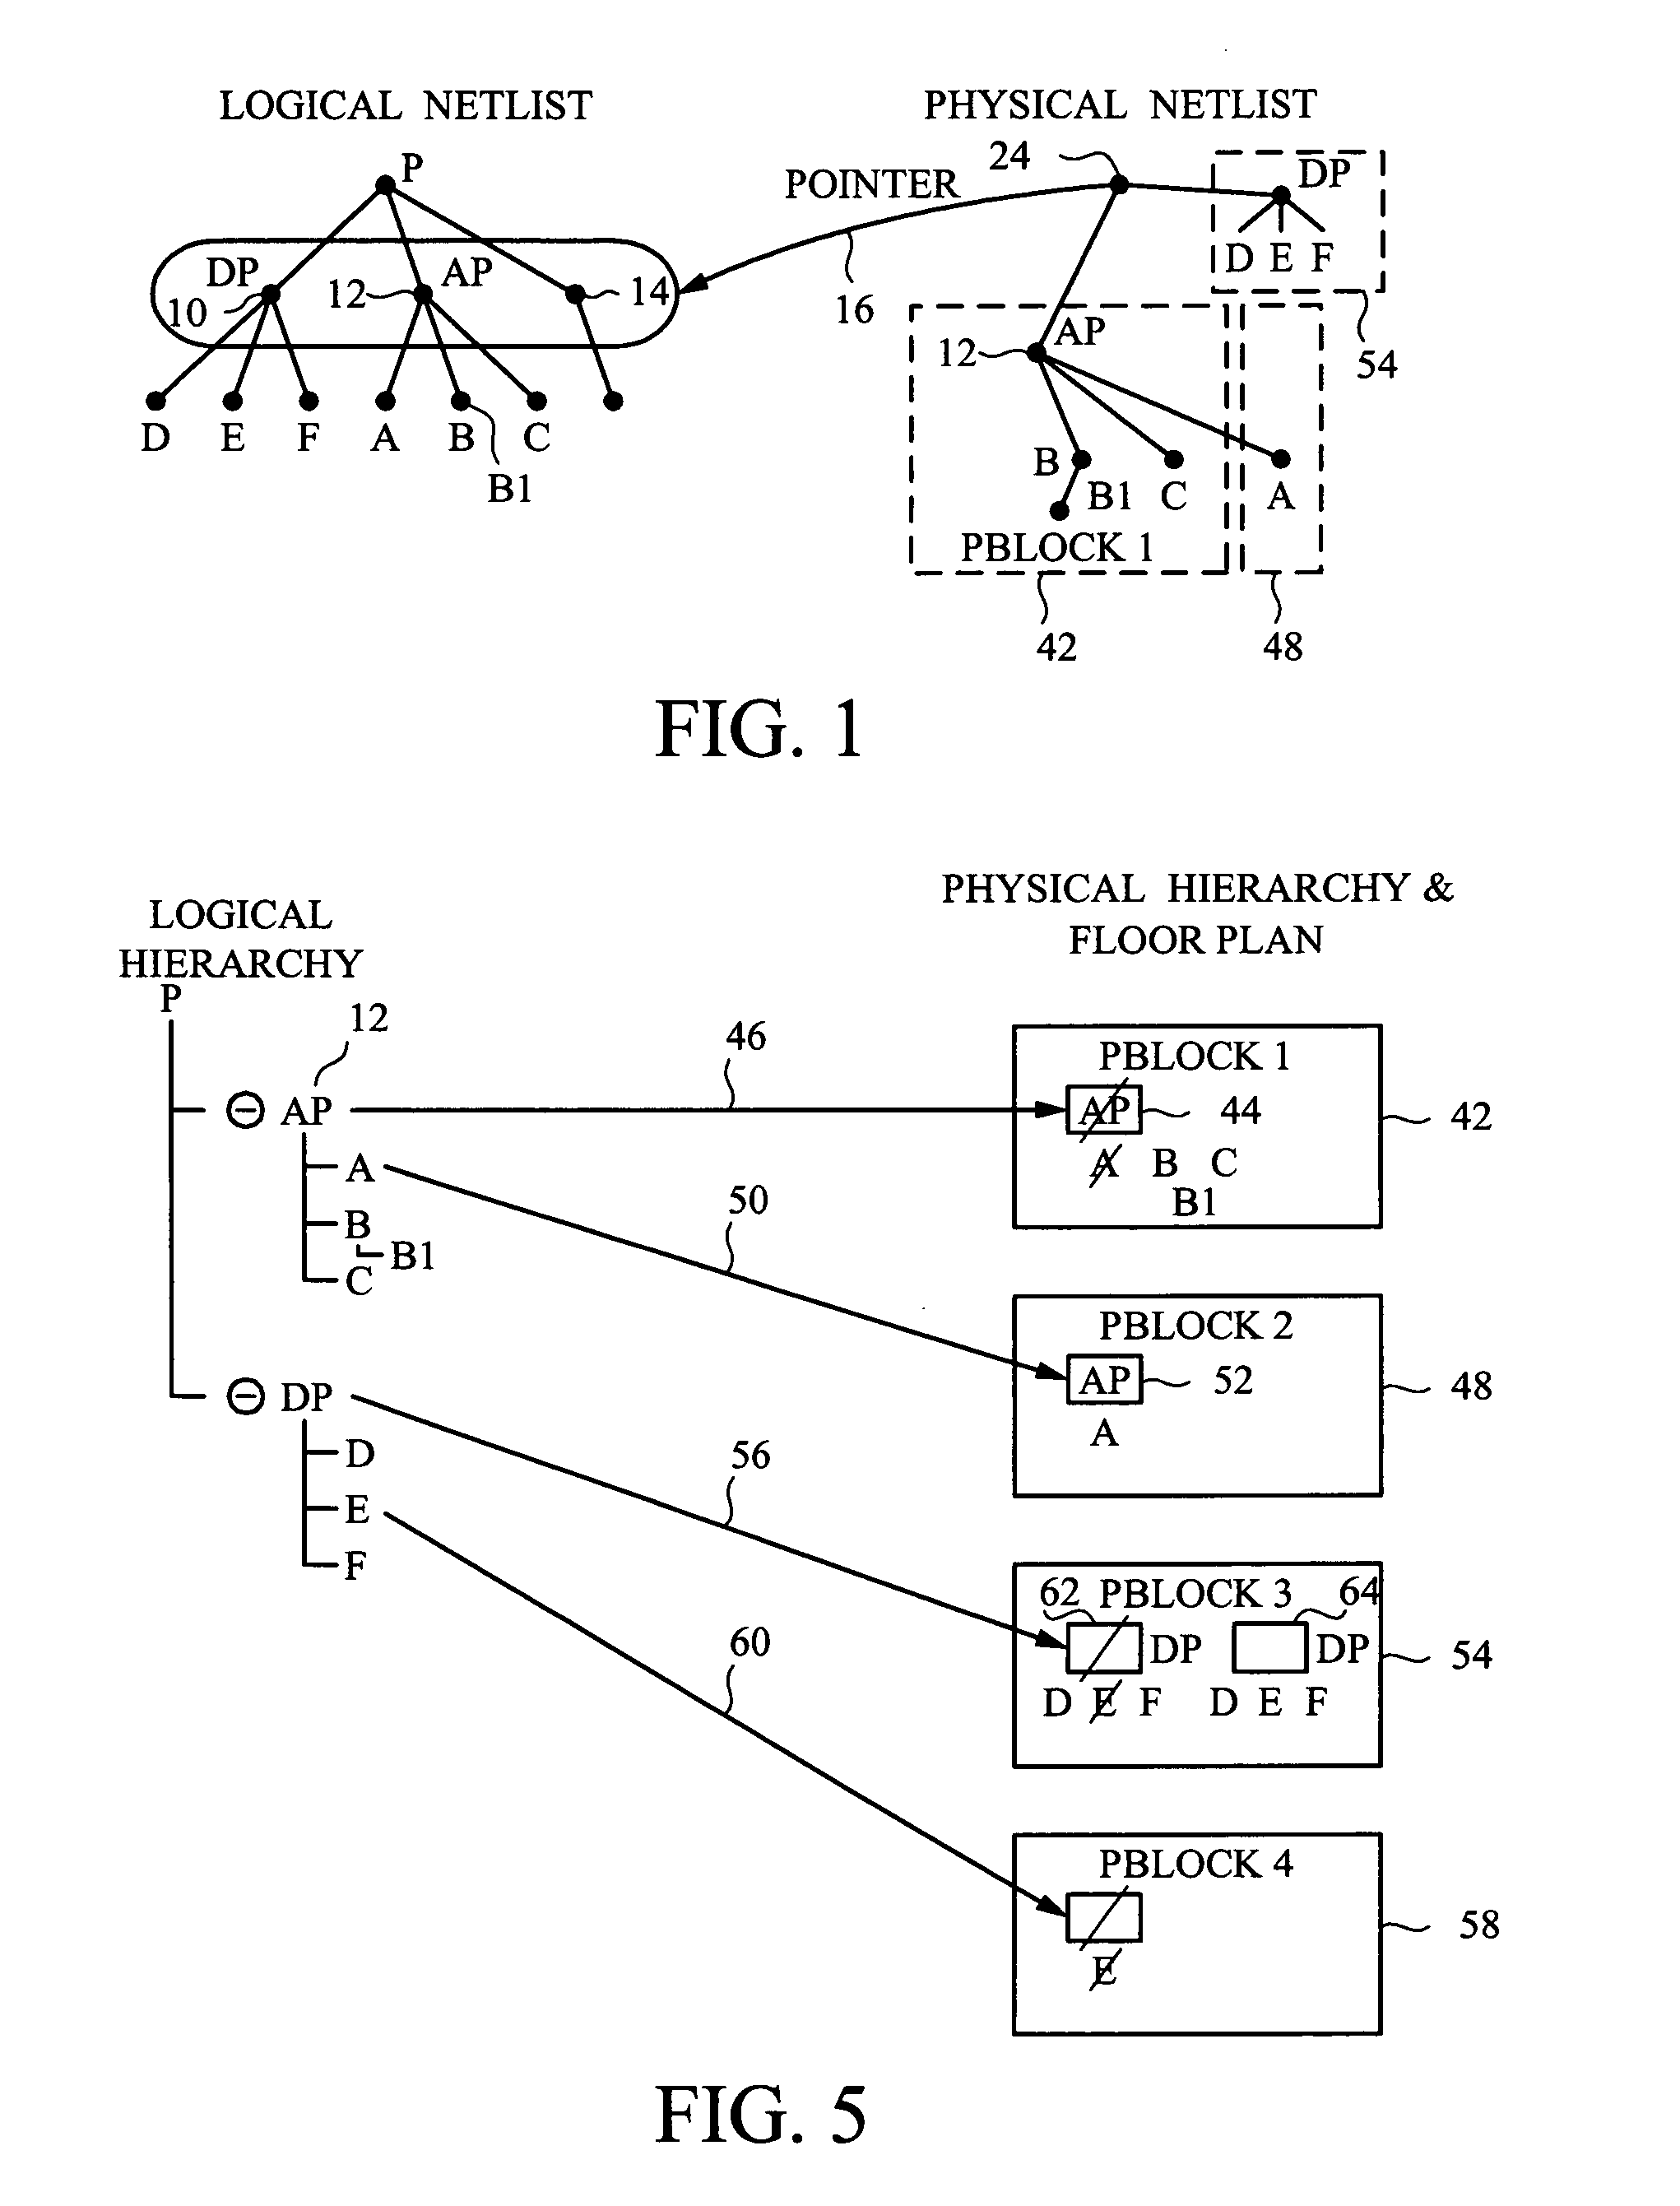 Data structures for representing the logical and physical information of an integrated circuit